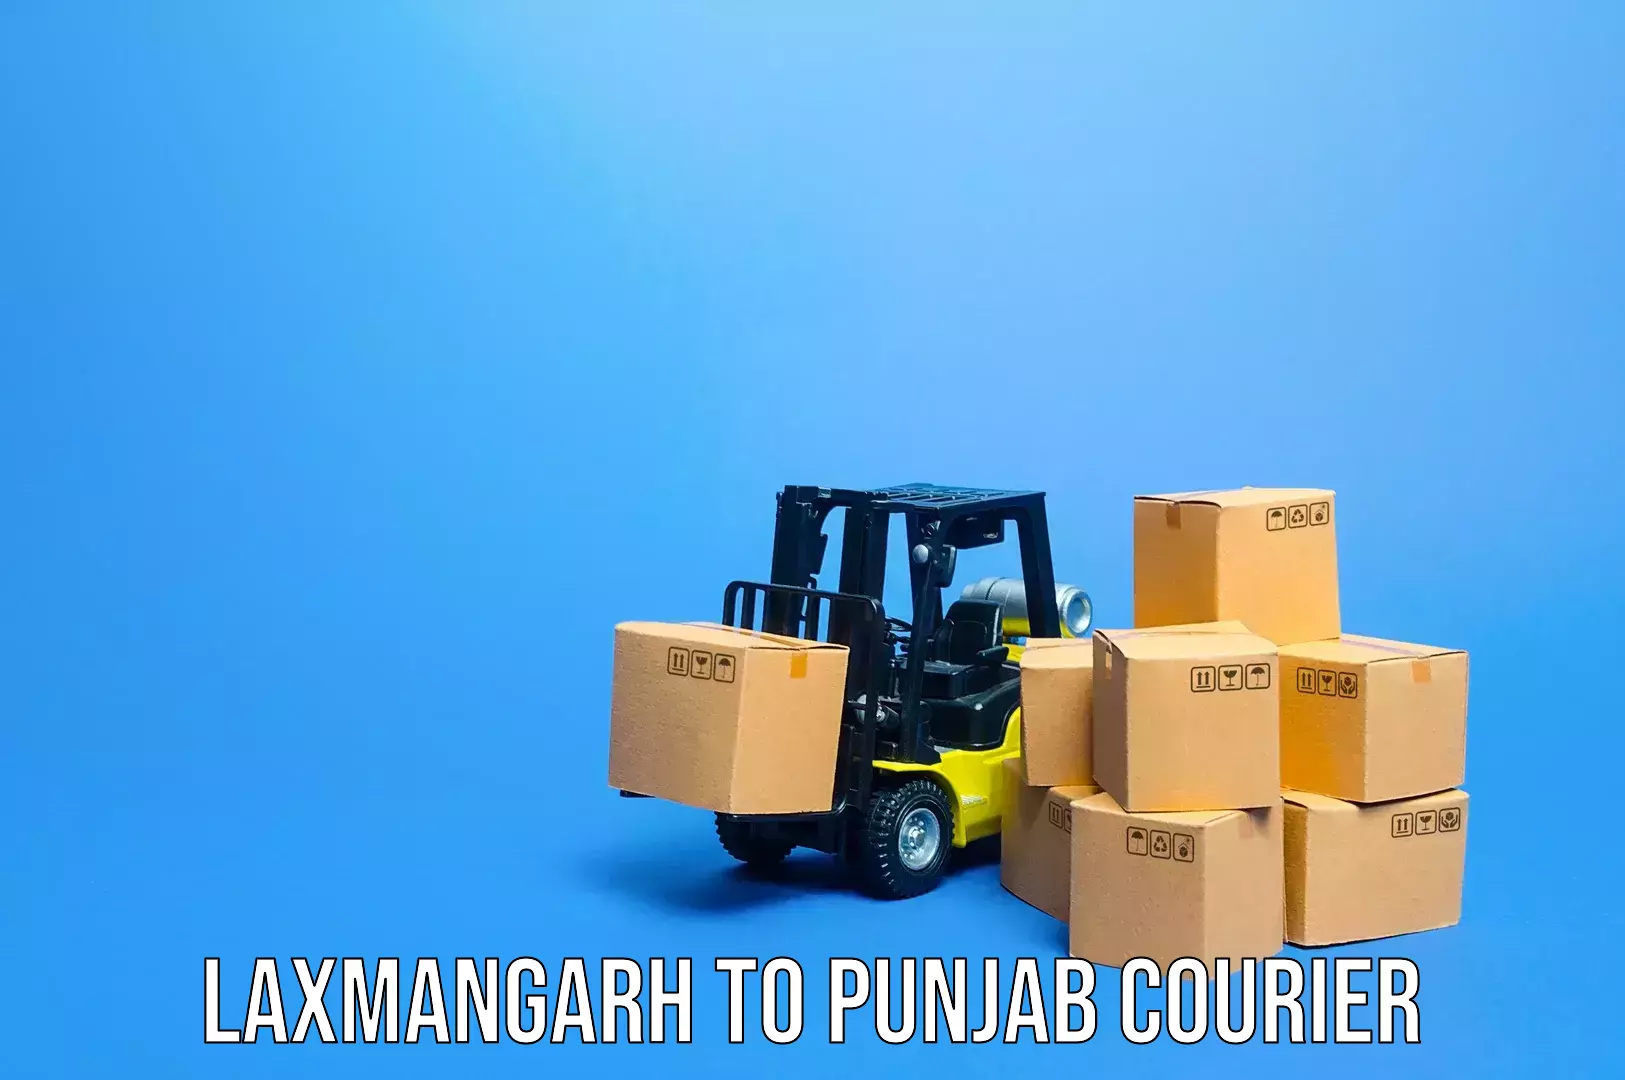 Luggage delivery system Laxmangarh to Punjab